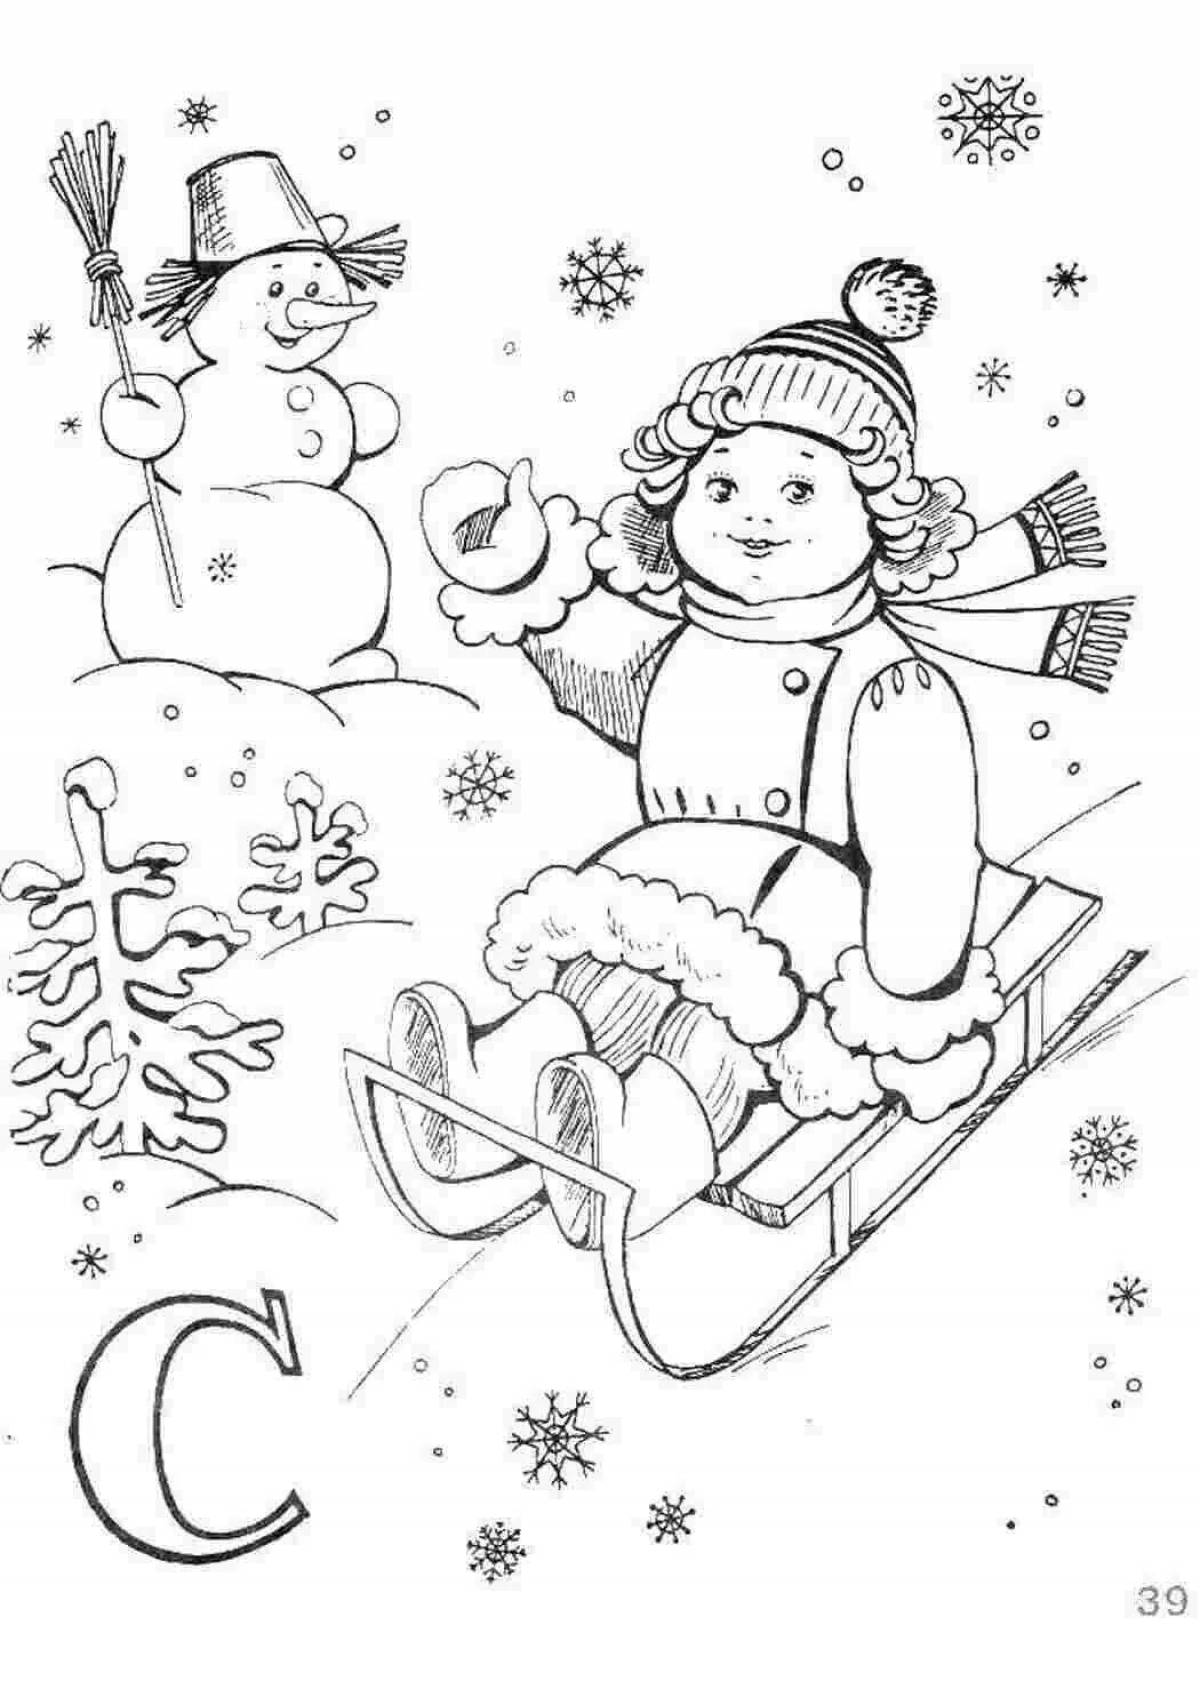 Playful january coloring book for kids